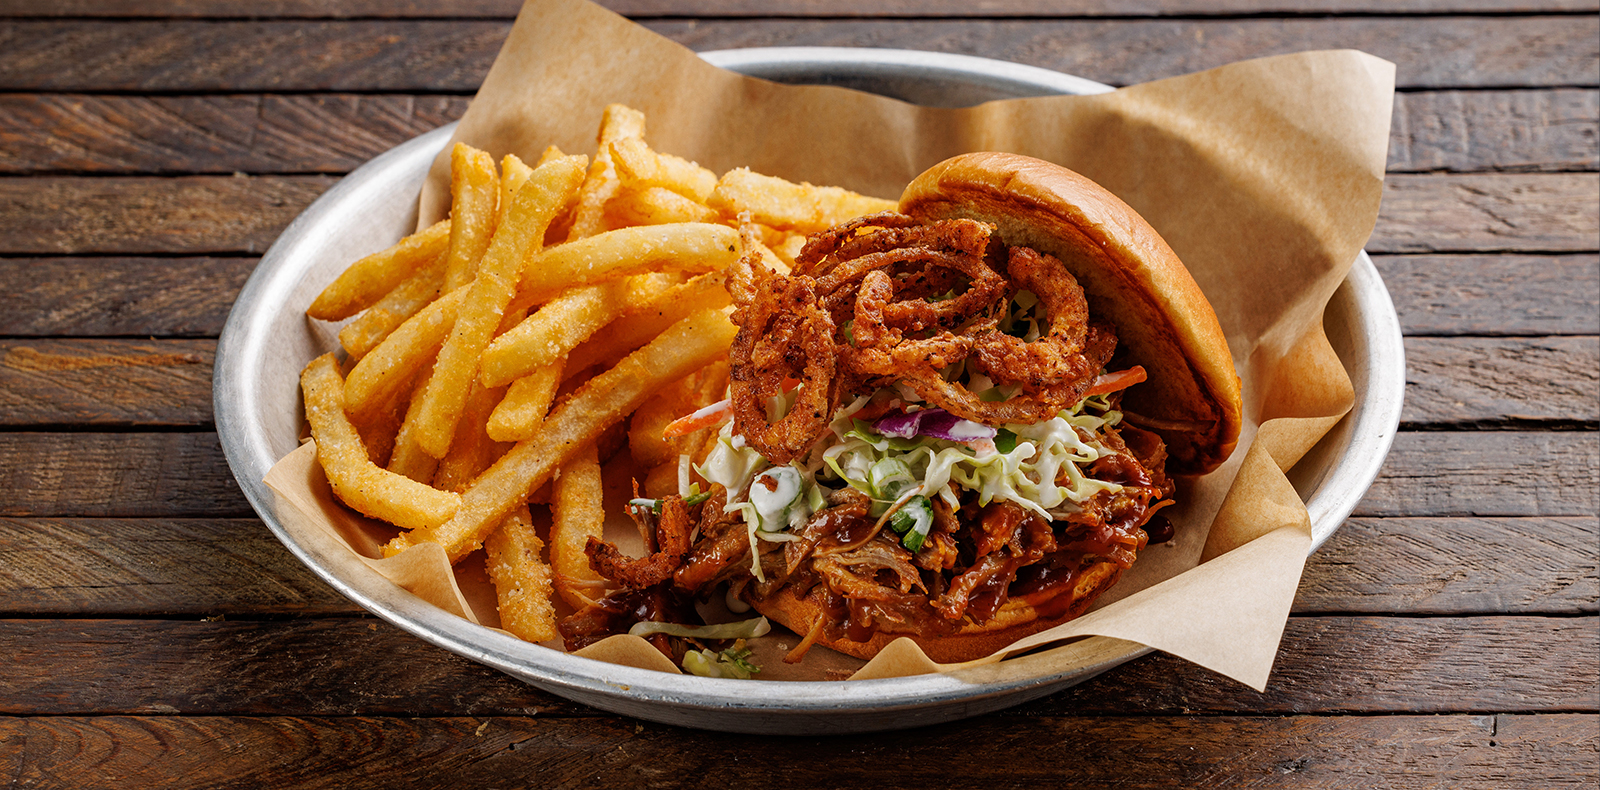 Pulled pork in a tangy Carolina-style BBQ sauce, coleslaw + crispy onion straws